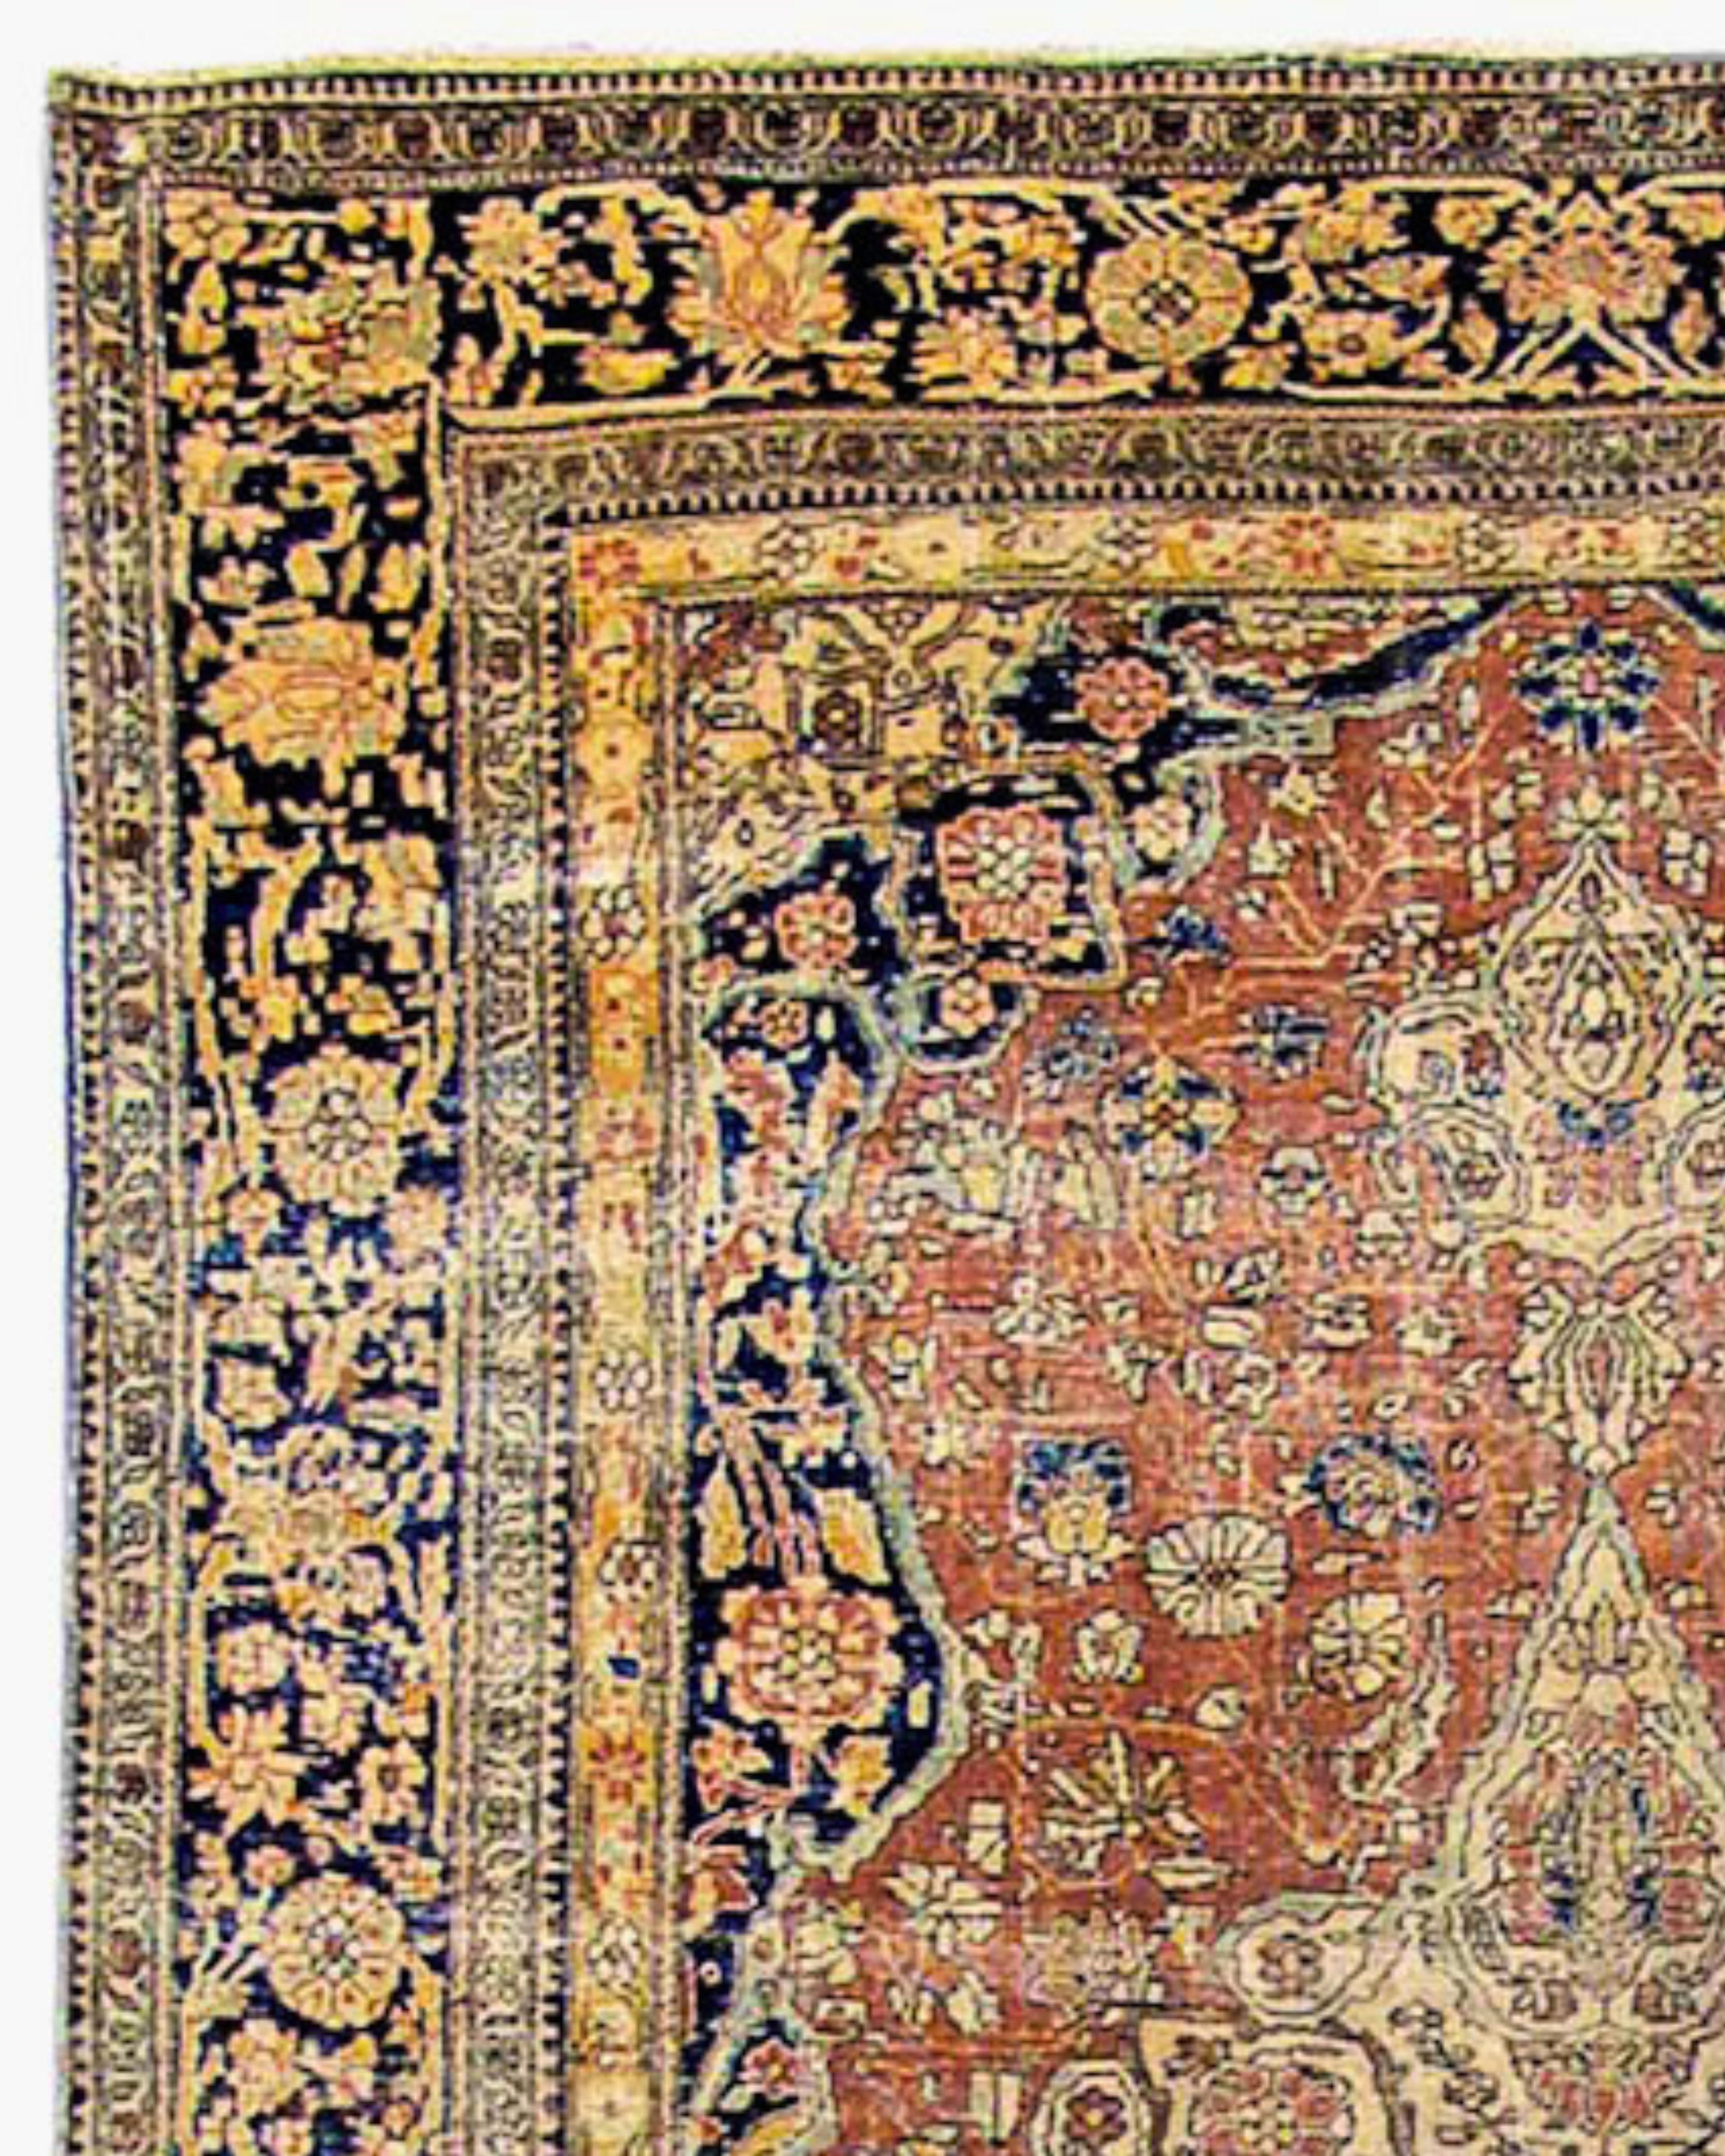 Antique Persian Mohtesham Kashan Rug, Late 19th Century For Sale 2